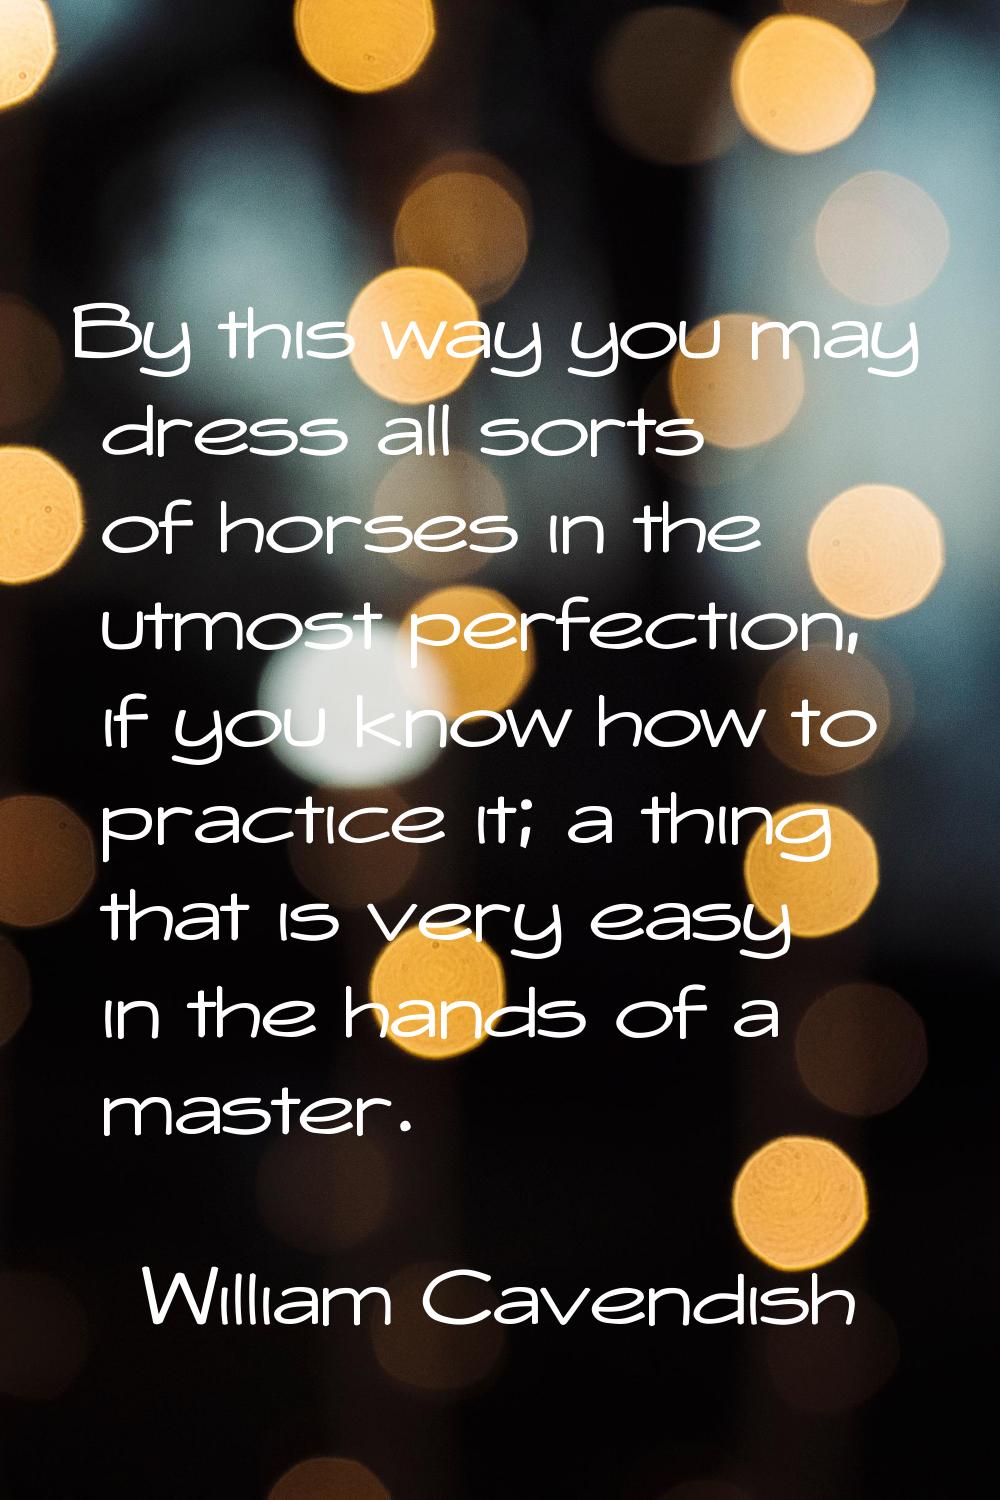 By this way you may dress all sorts of horses in the utmost perfection, if you know how to practice